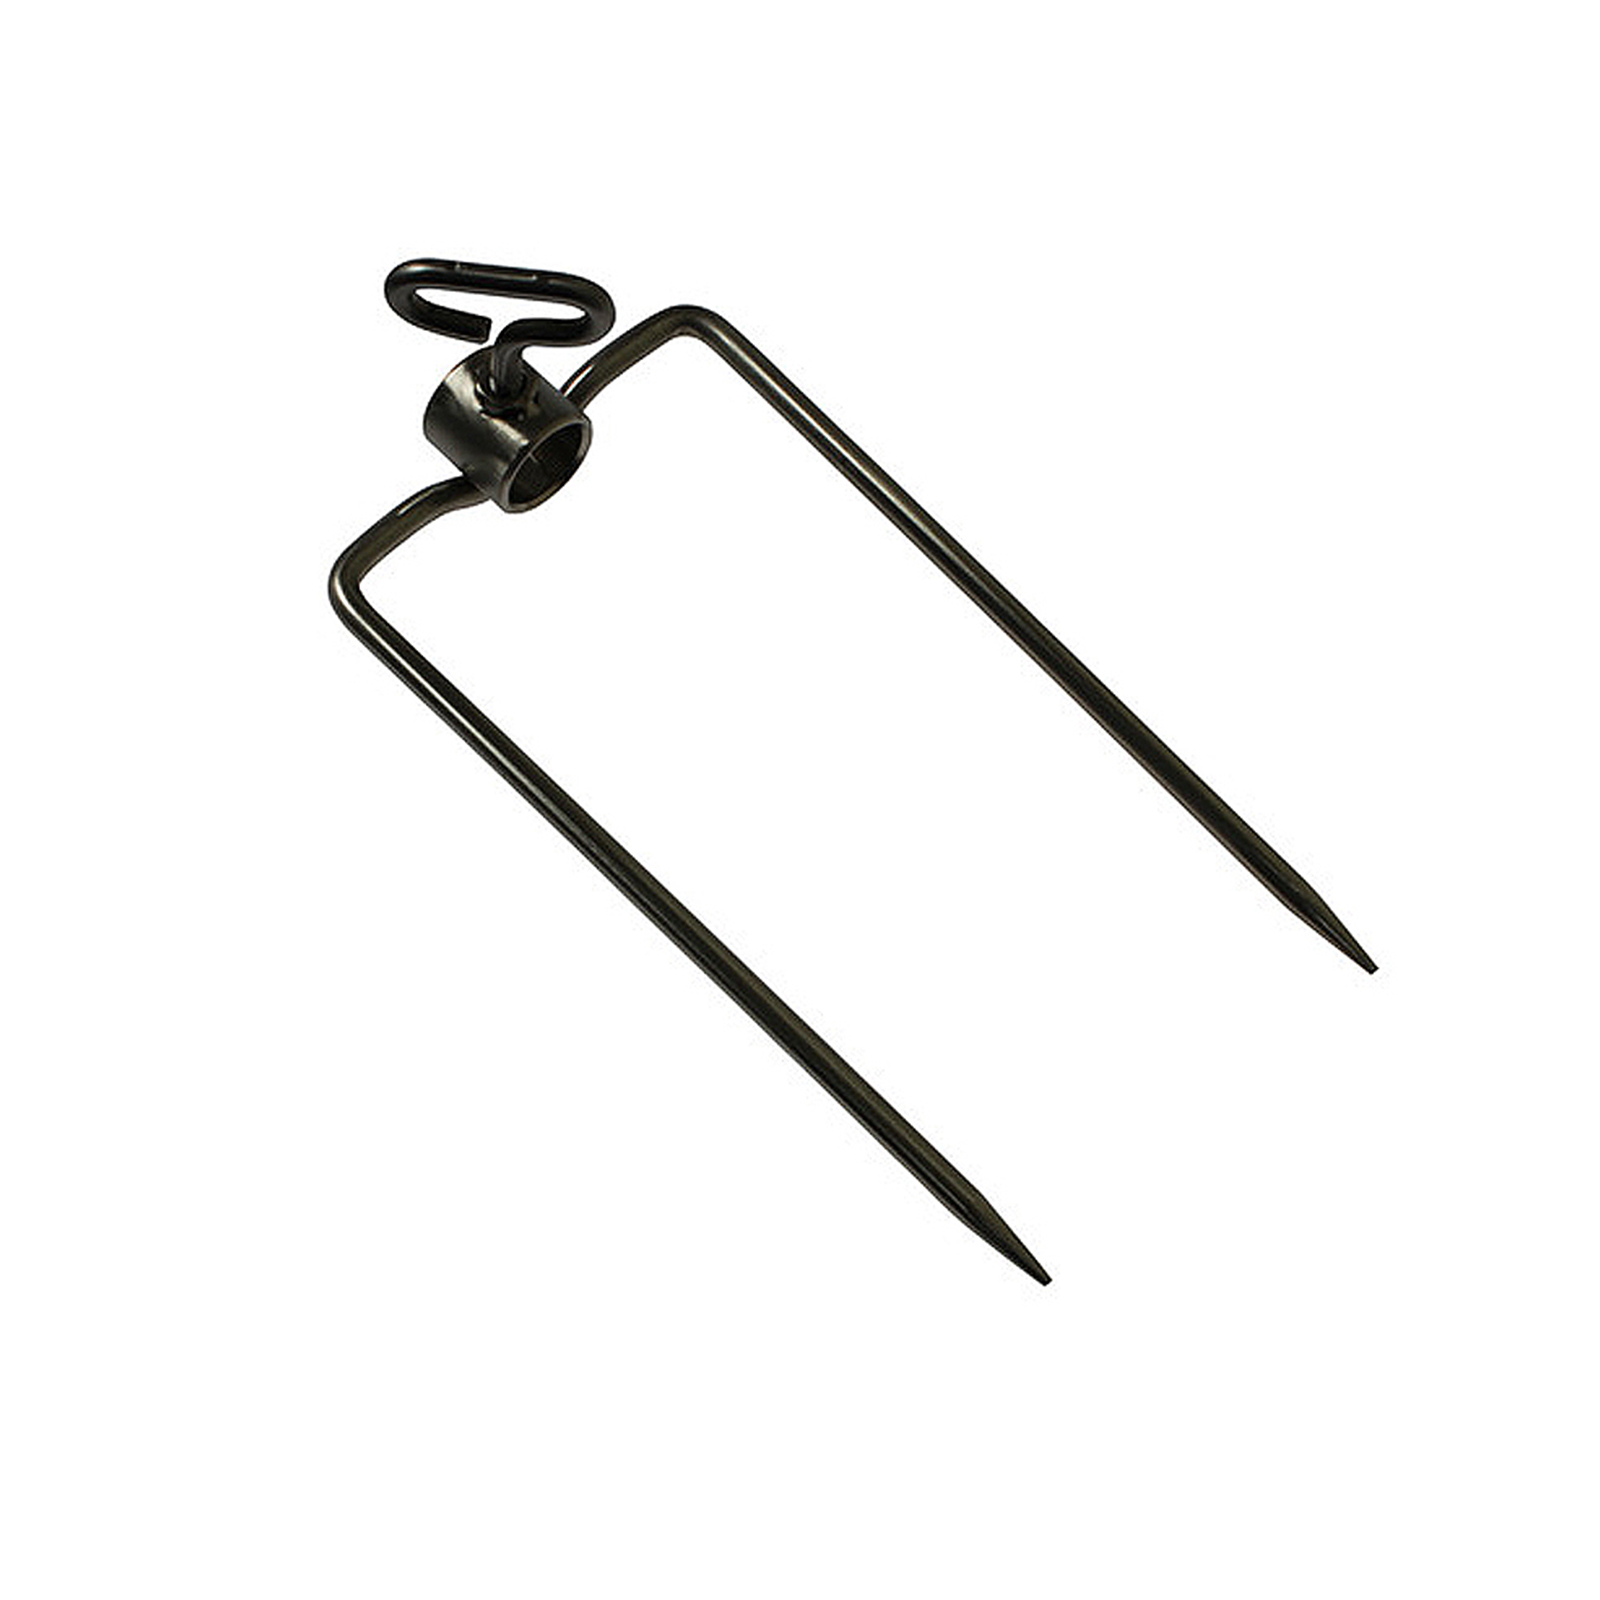 S/S Long 2 Prong Forks for Rotisserie BBQ Spit  (Set of 2) suit 32mm Round Skewer Rod from The BBQ Store - SSF-3082B